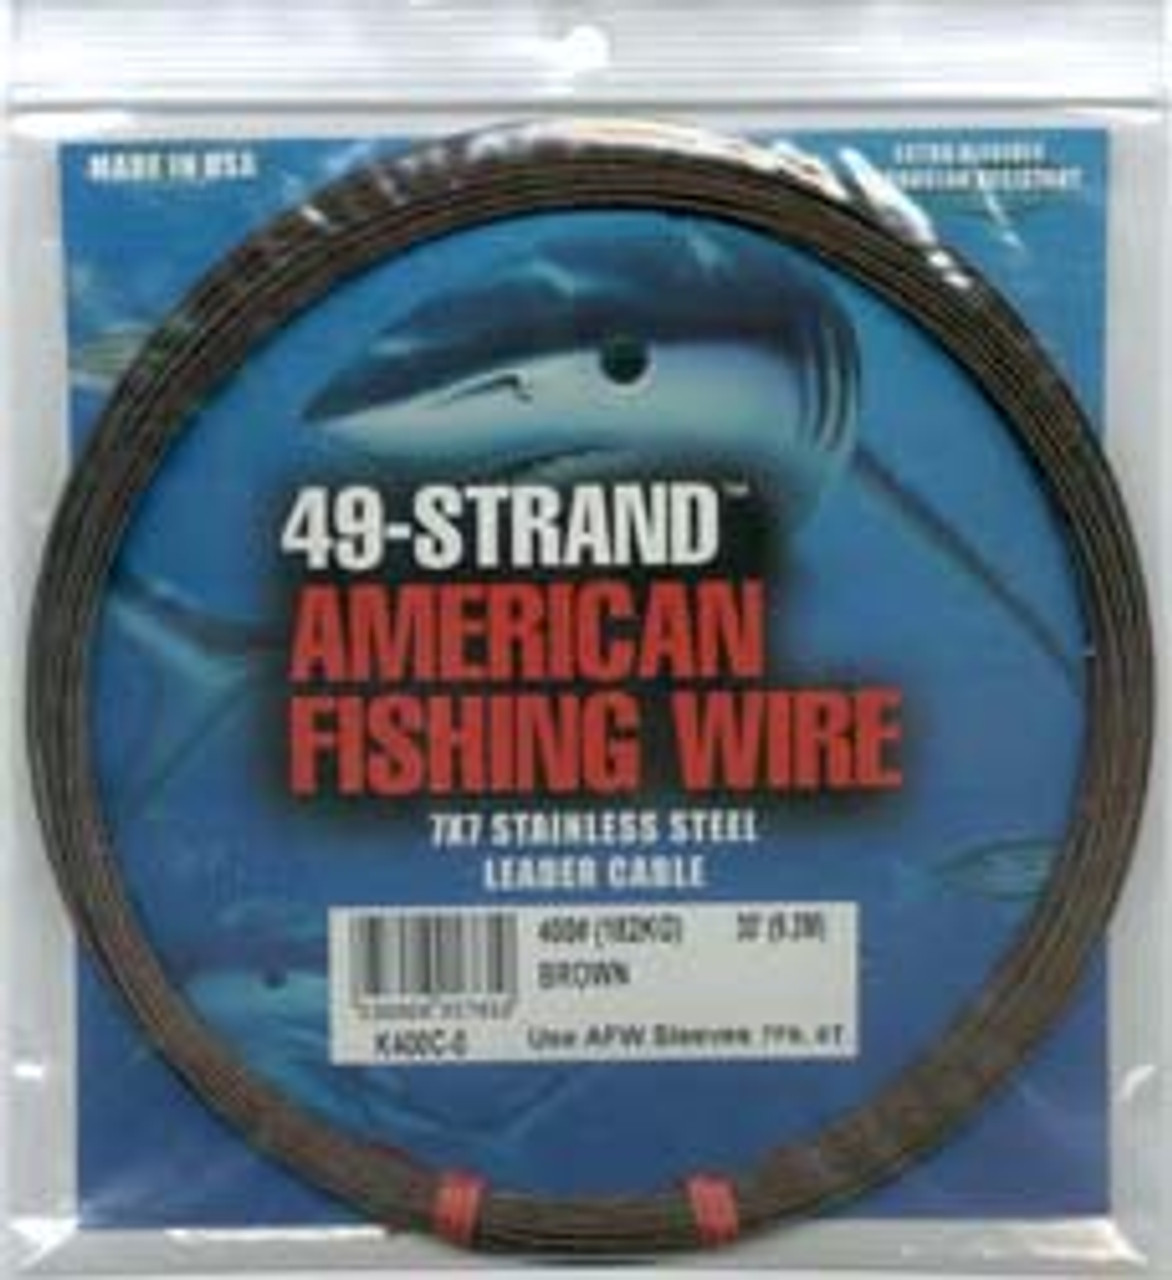 American Fishing Wire 49 Strand Bright 300ftTest: 800